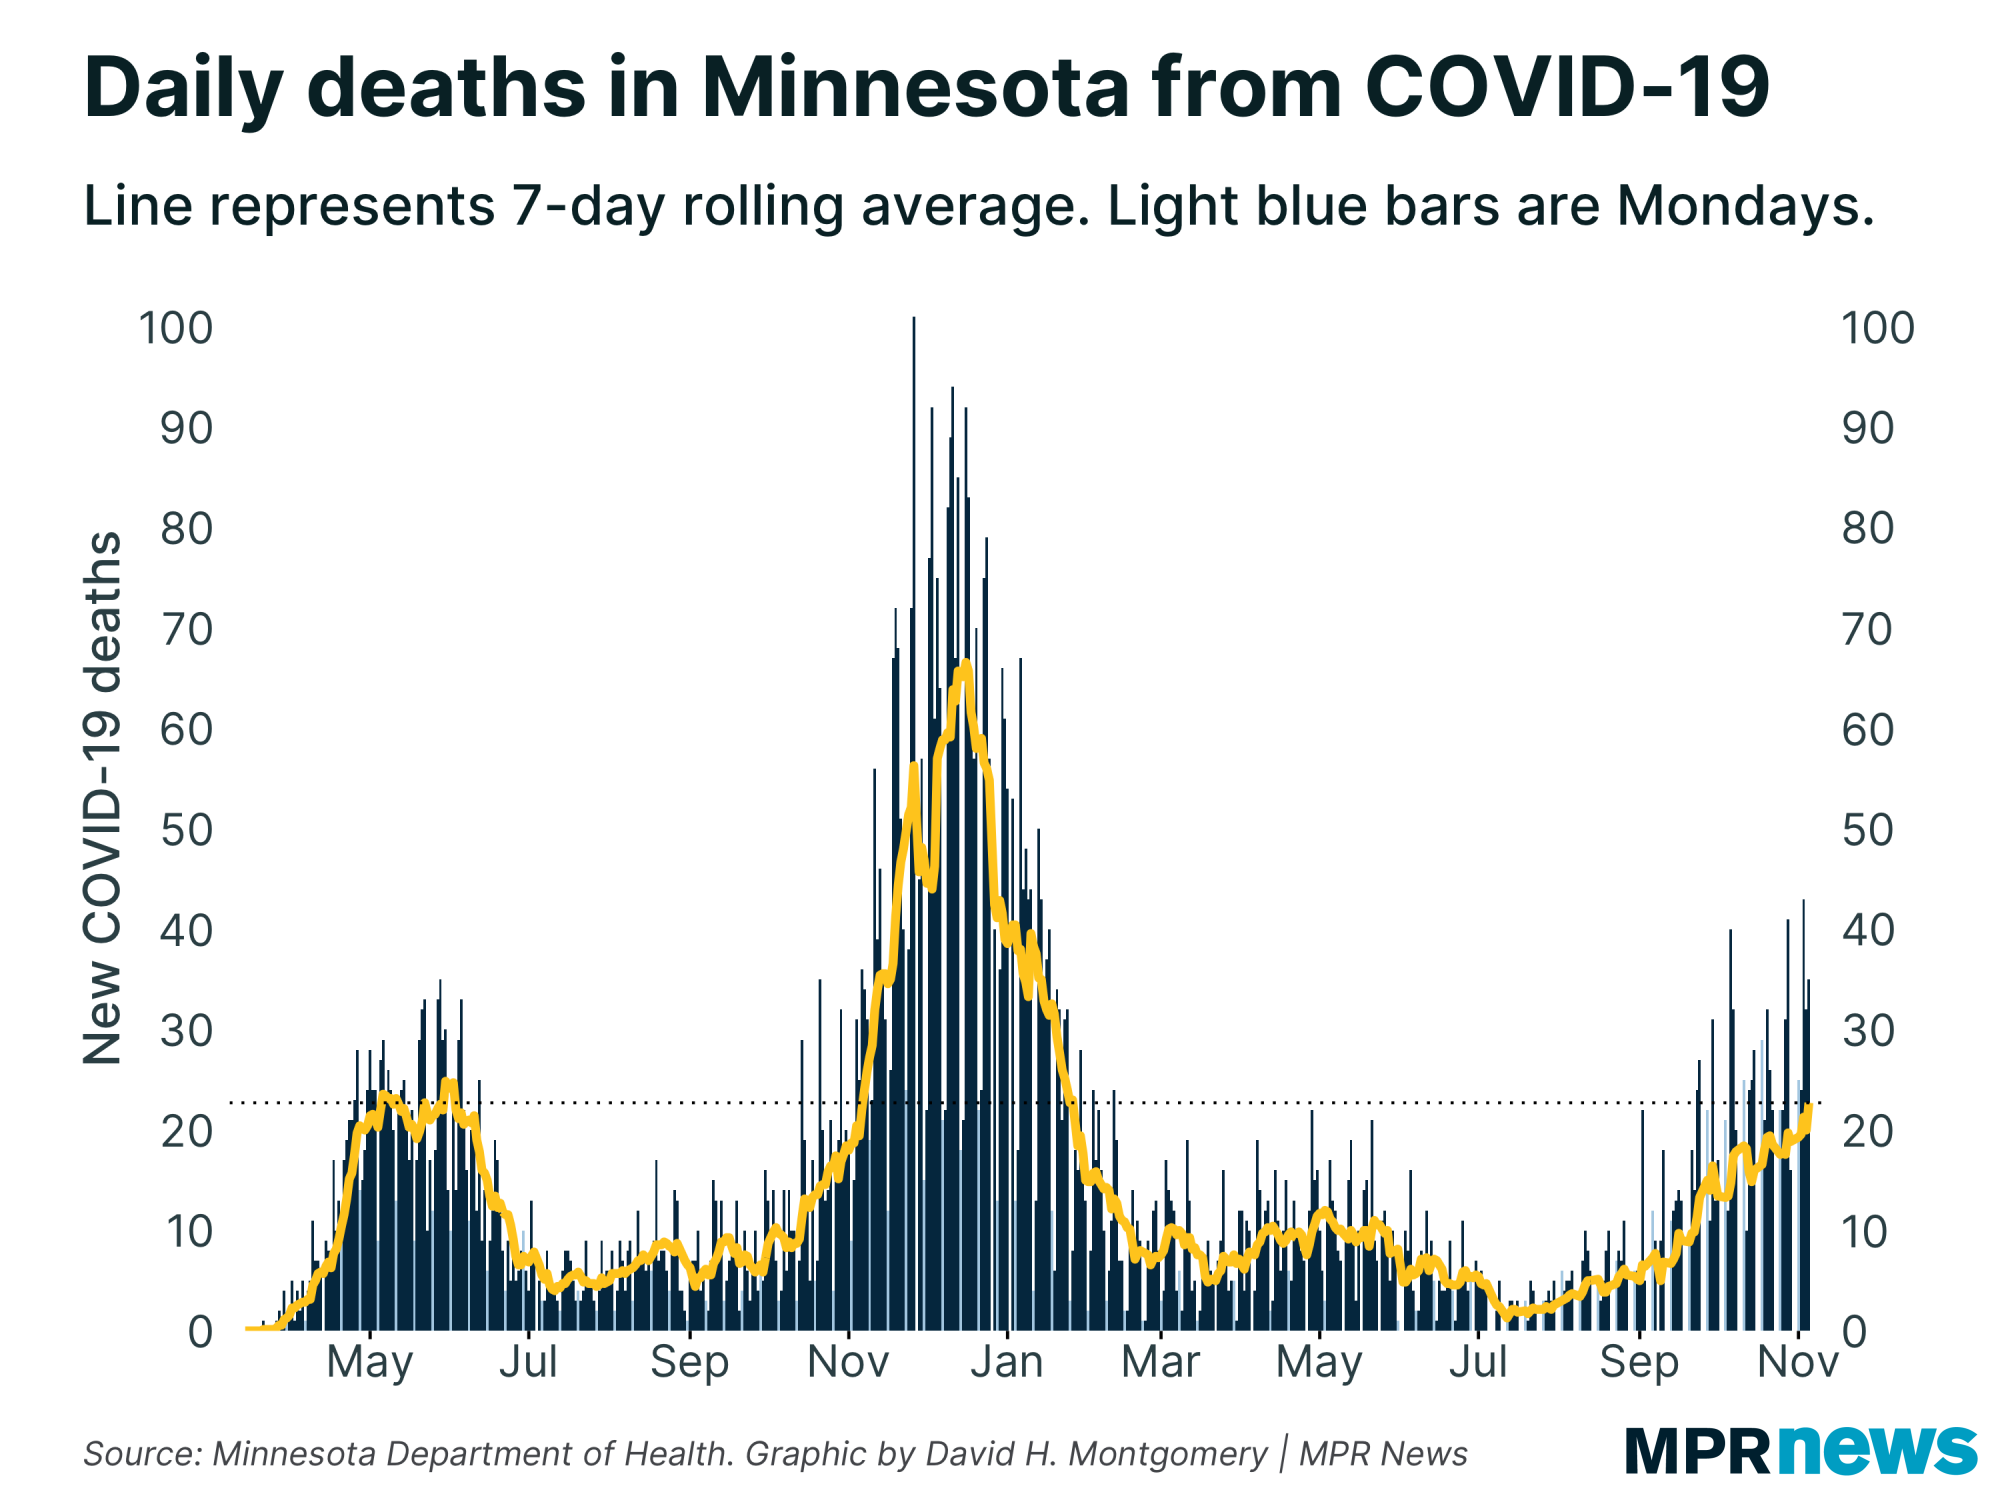 Graph of daily deaths in Minnesota from COVID-19